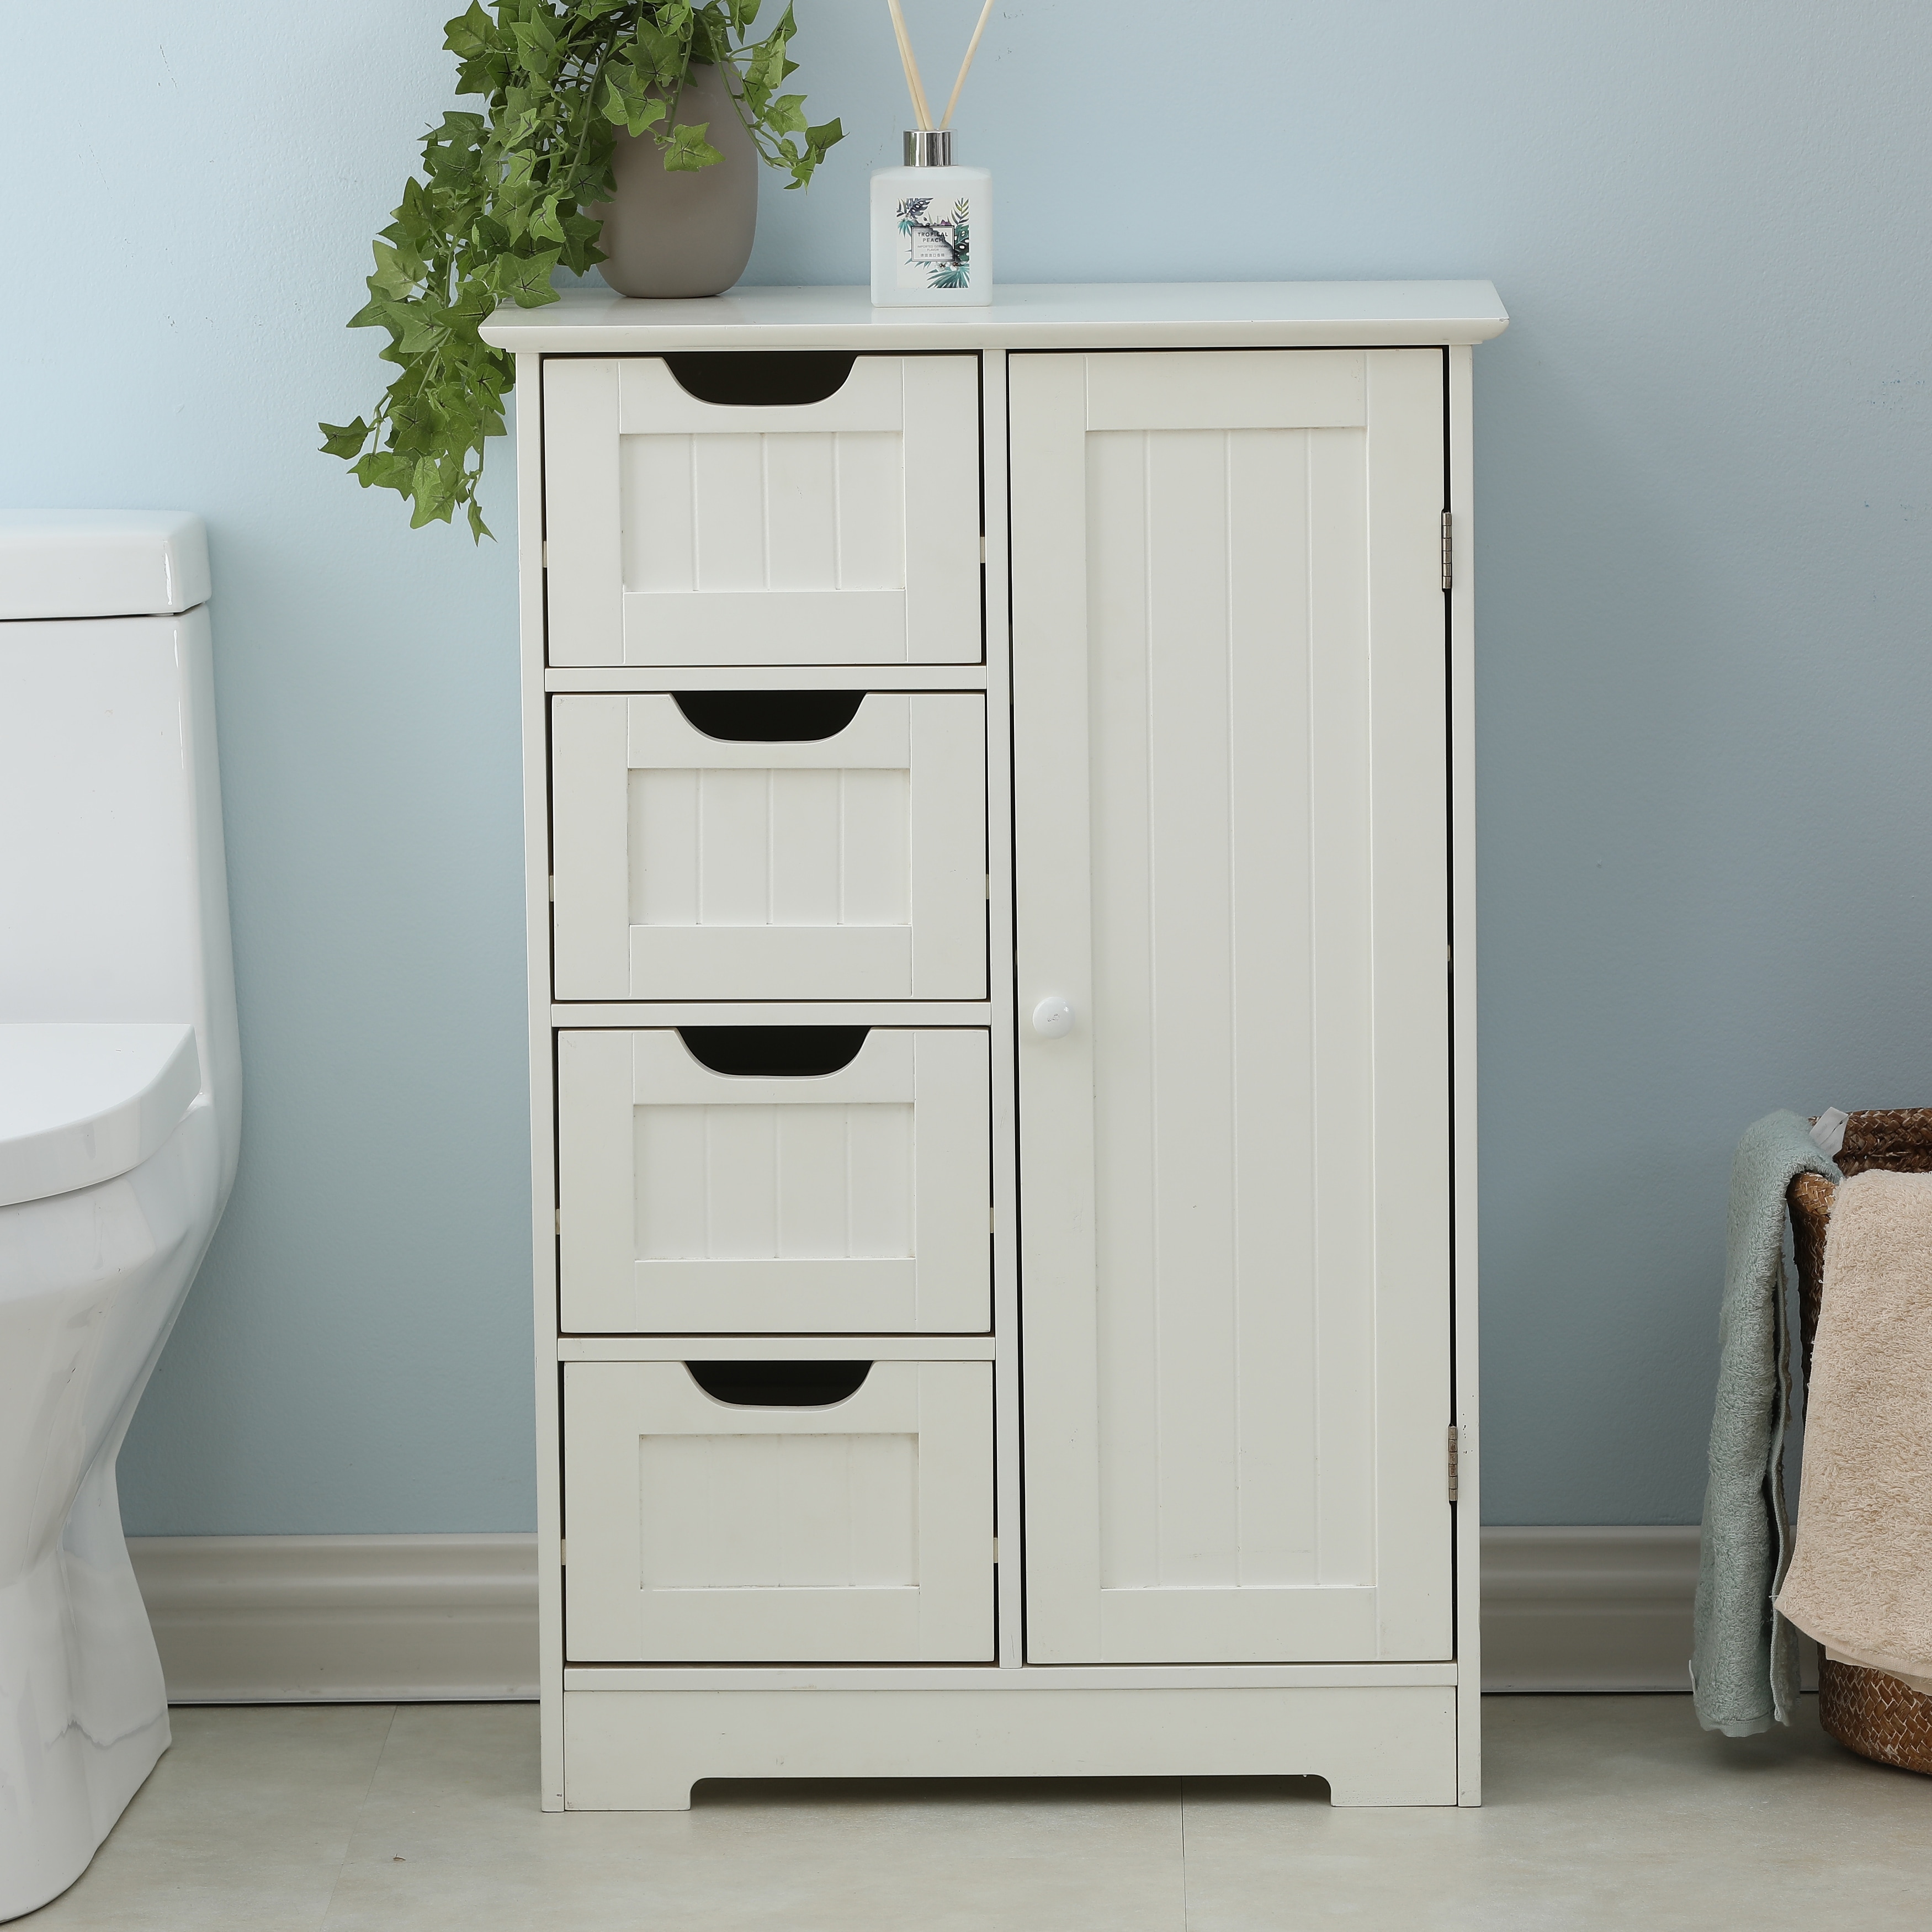 https://ak1.ostkcdn.com/images/products/is/images/direct/d884861a4edfd0db5475d7cc7ed8716c36e35687/White-Wood-4-Drawer-1-Door-Bathroom-Storage-Cabinet.jpg